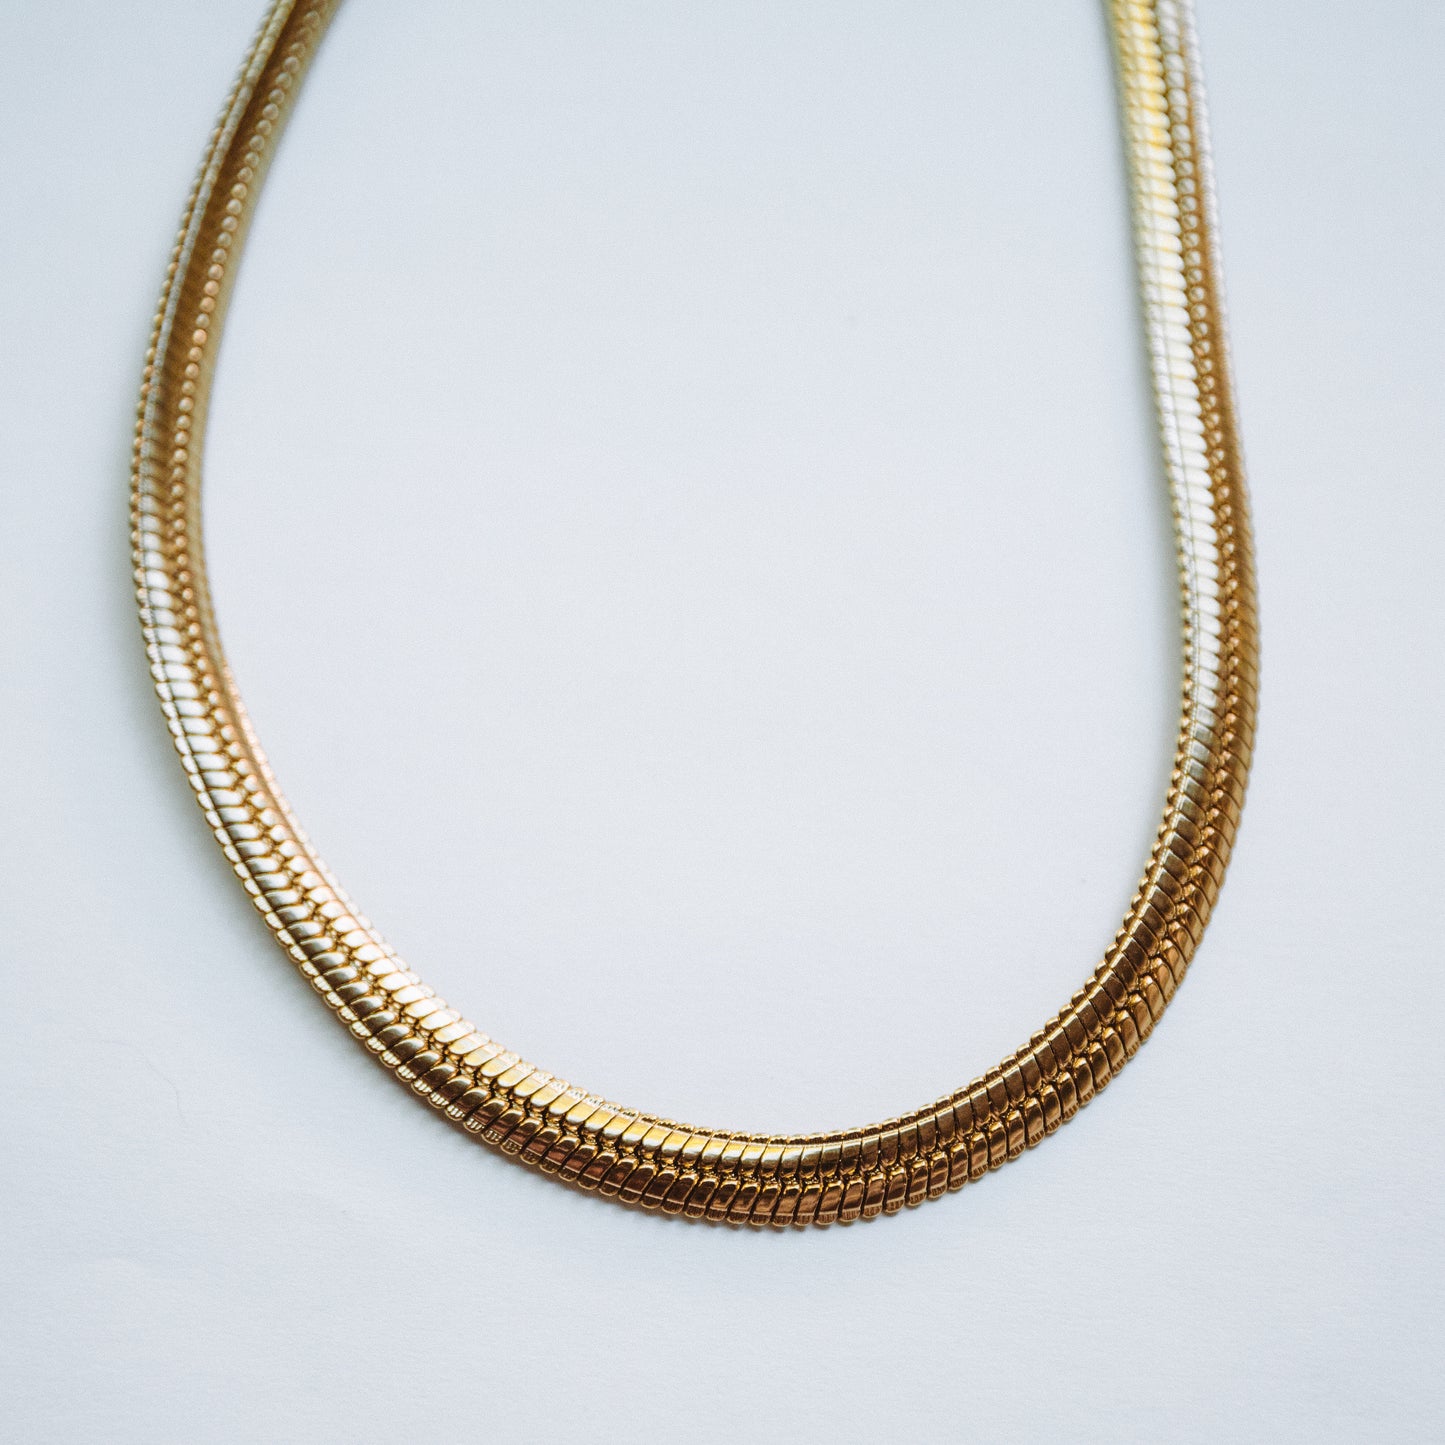 The XL Snake Necklace